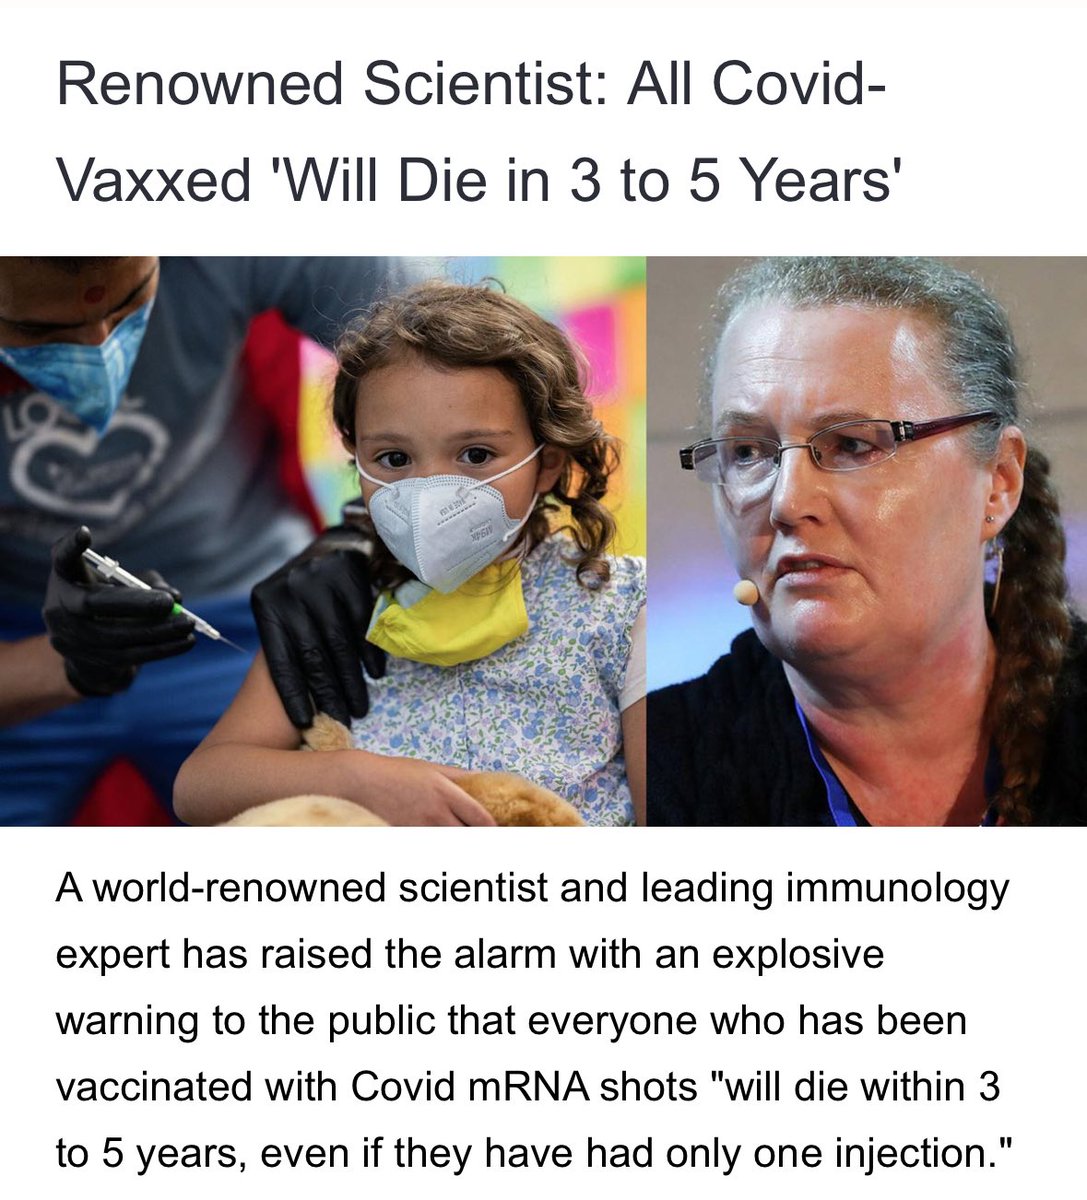 Slay news~ 

Praying this is not true 

The alert was issued by Professor Dr. Dolores Cahill.
Prof. Cahill has over 25 years of expertise in high-throughput protein array, antibody array, proteomics technology development, and automation.
The experience includes work on how…